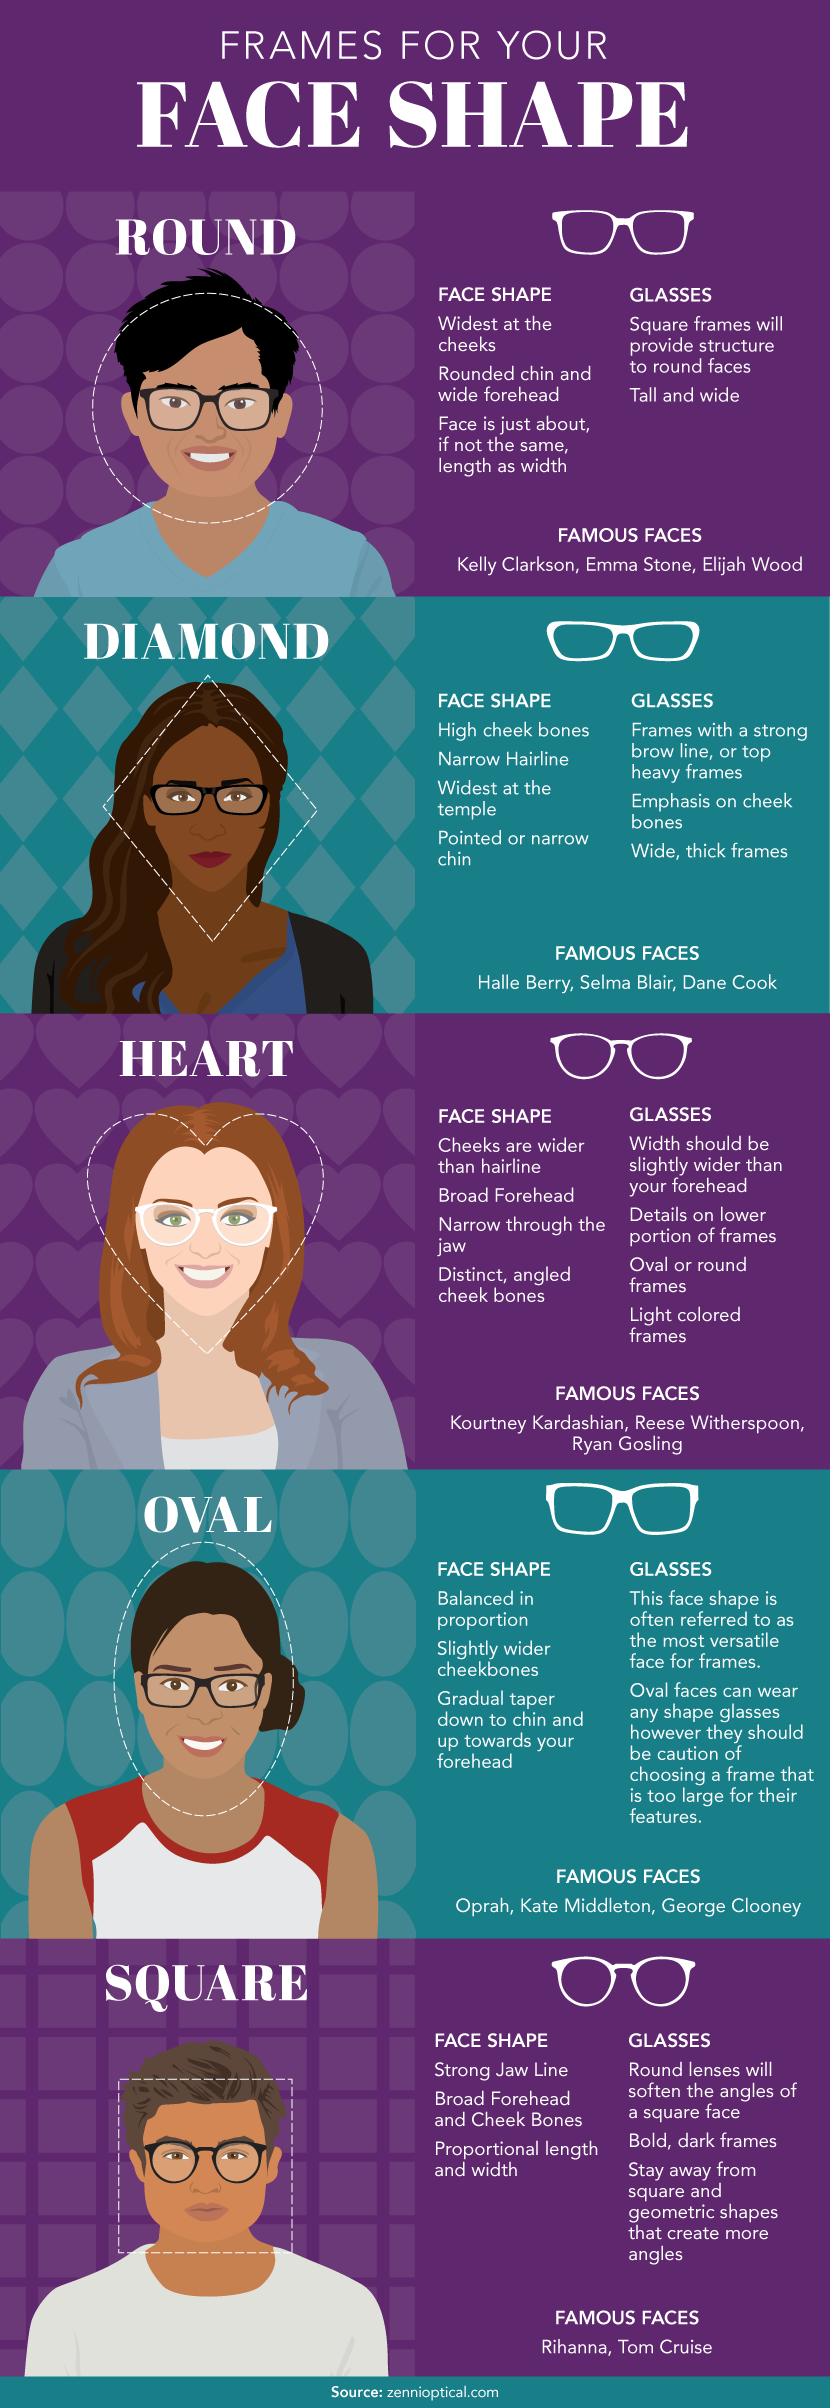 Frames For Your Face Shape - Guide to Healthy Eyes